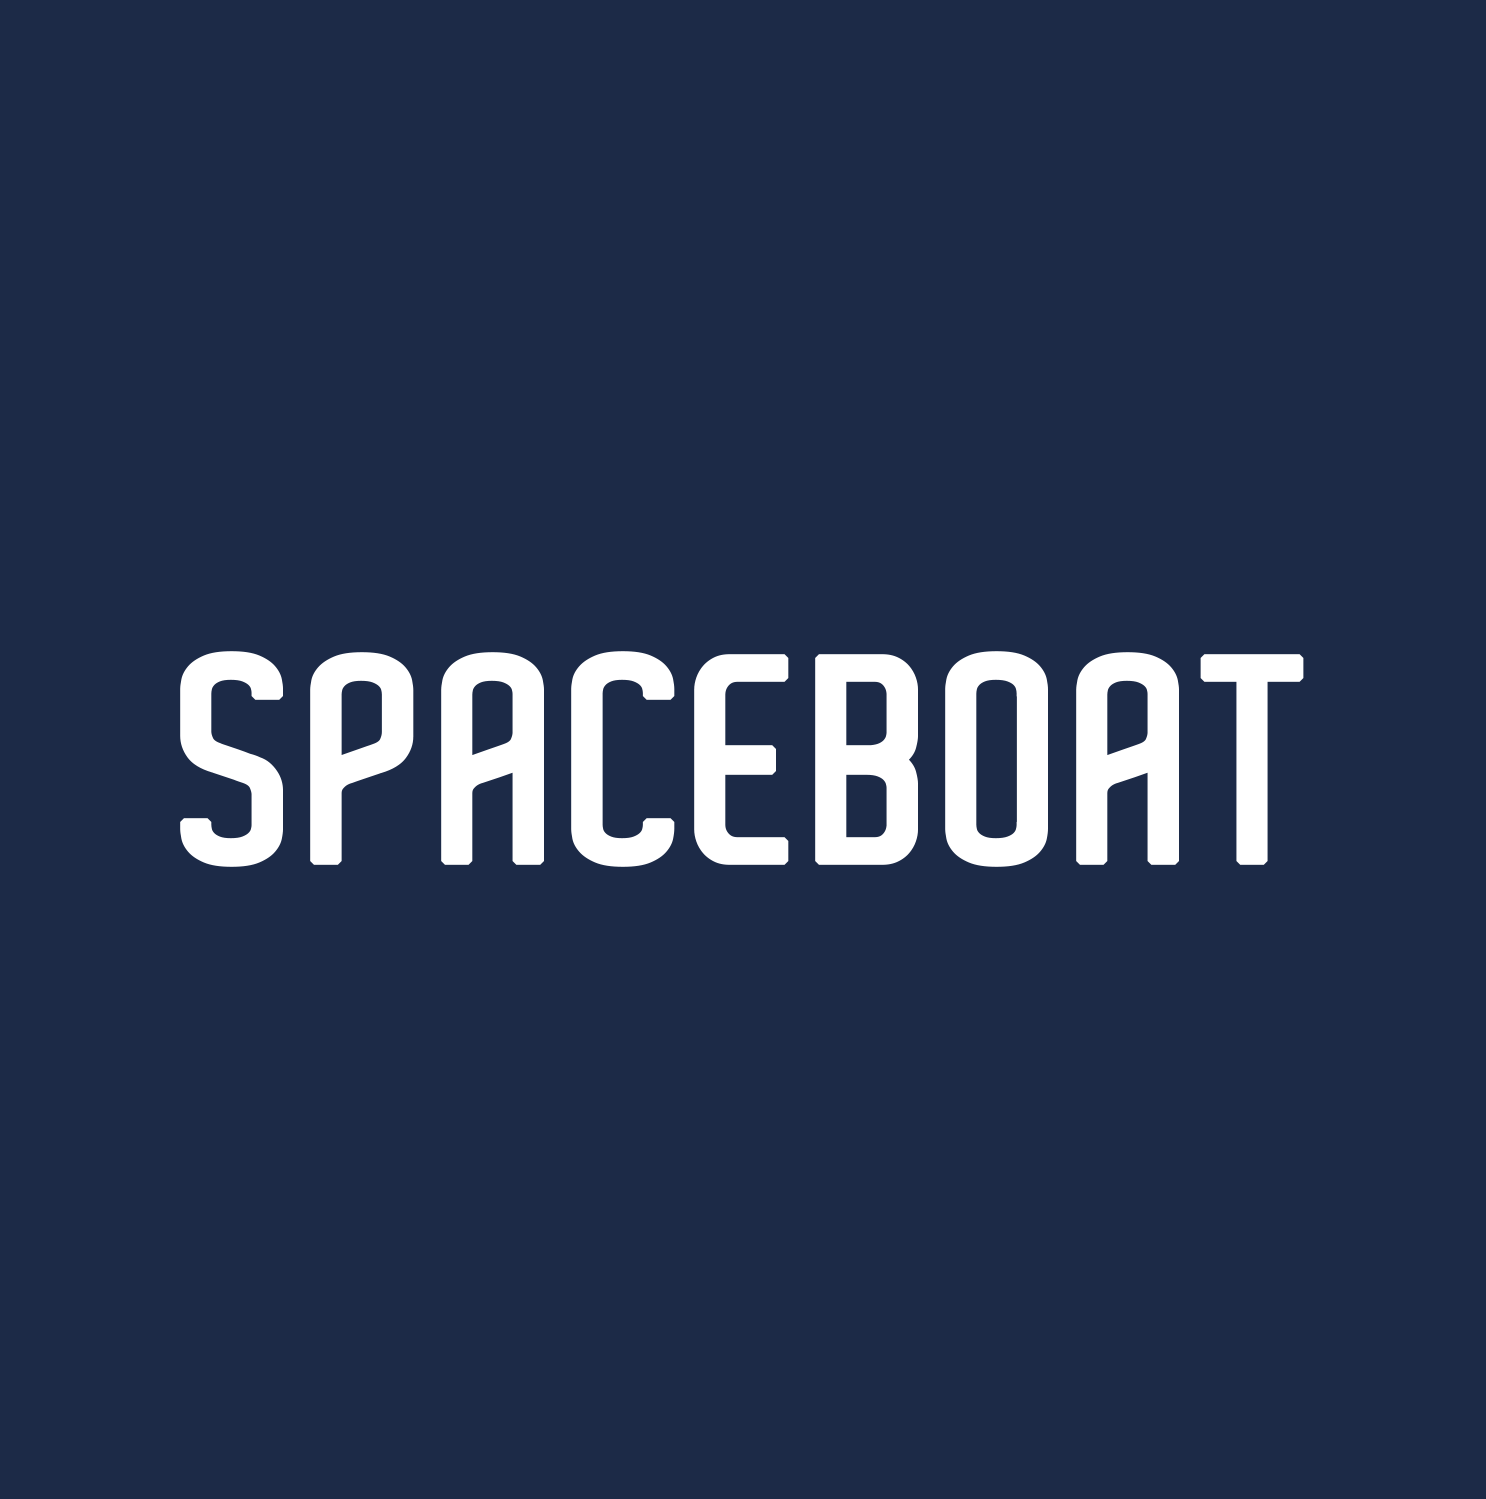 Guest post - Spaceboat